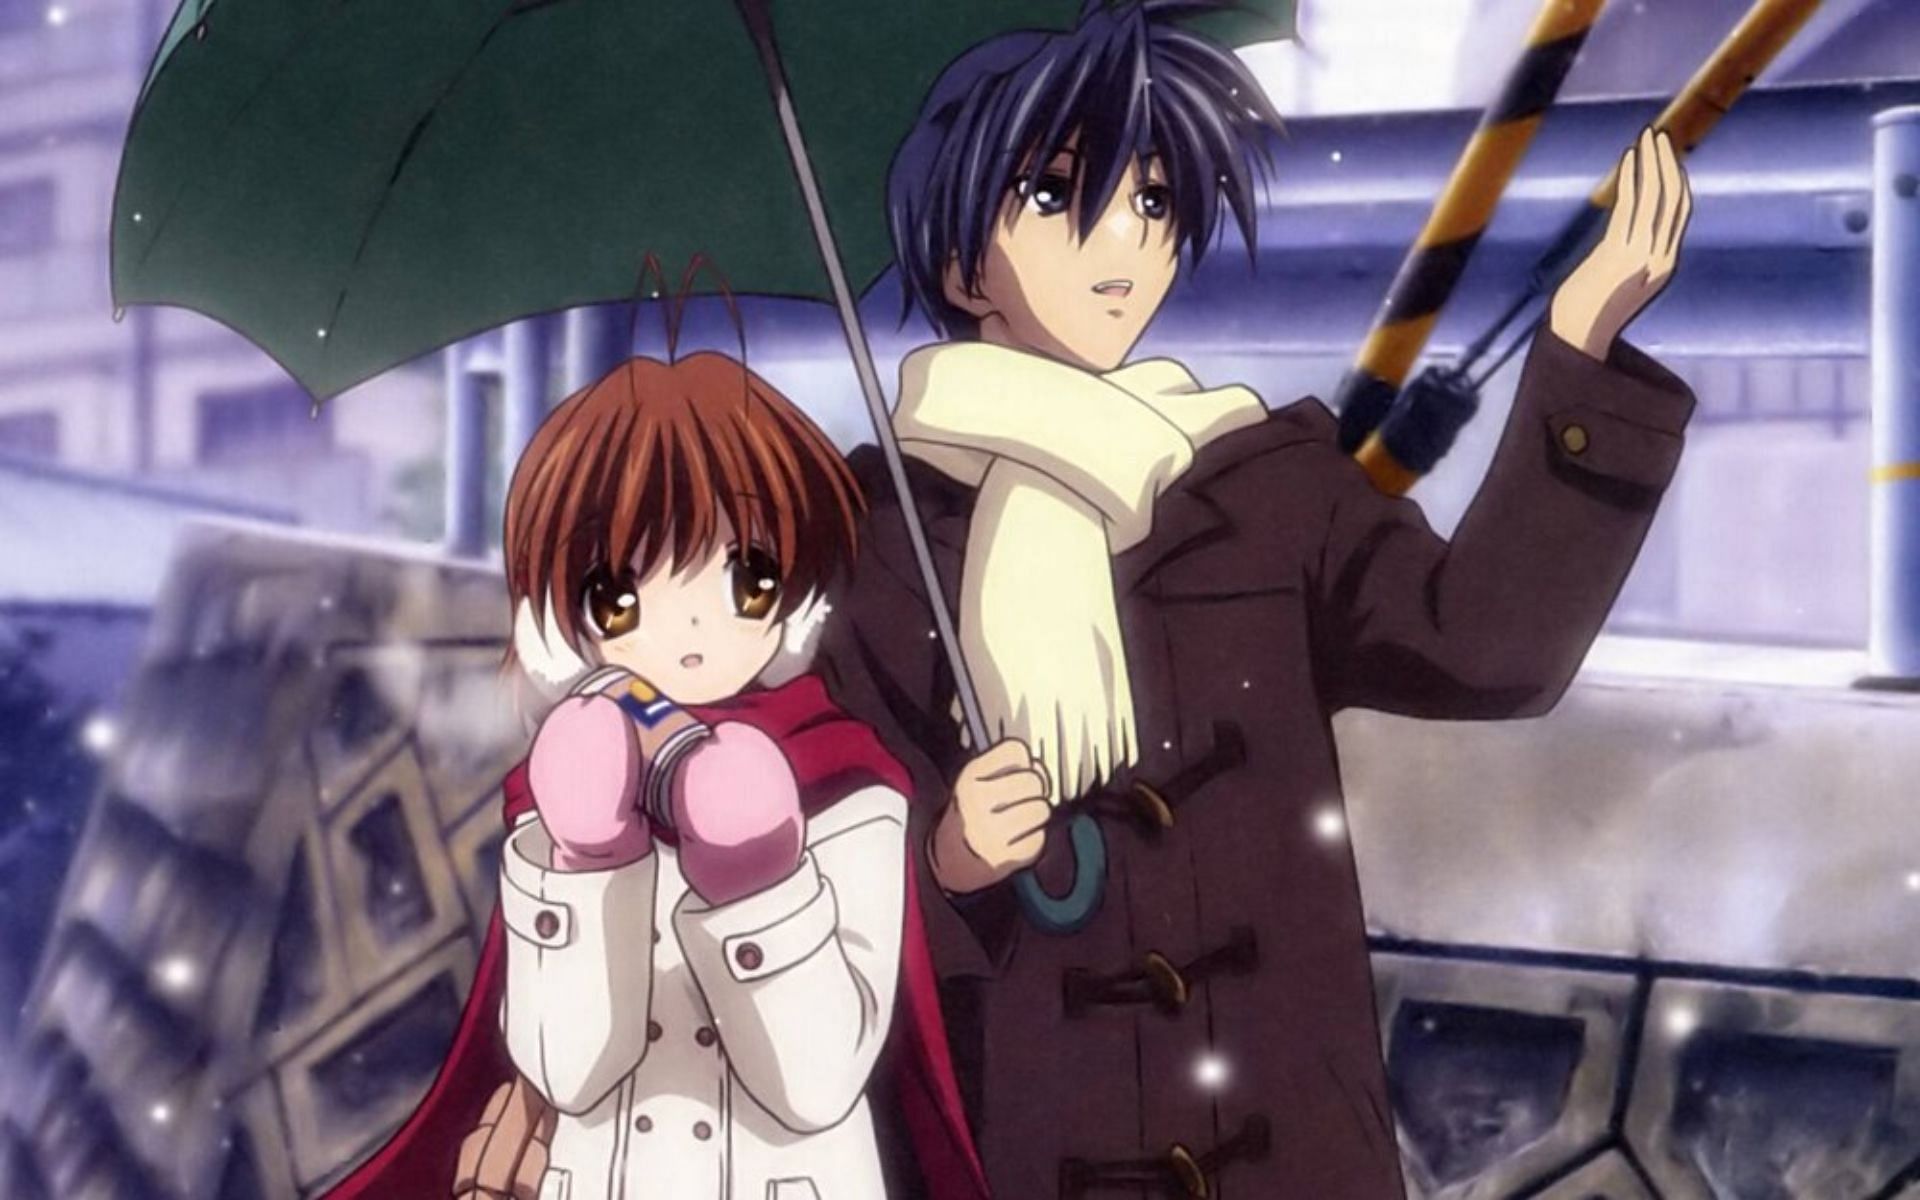 Characters of Clannad, Clannad Wiki